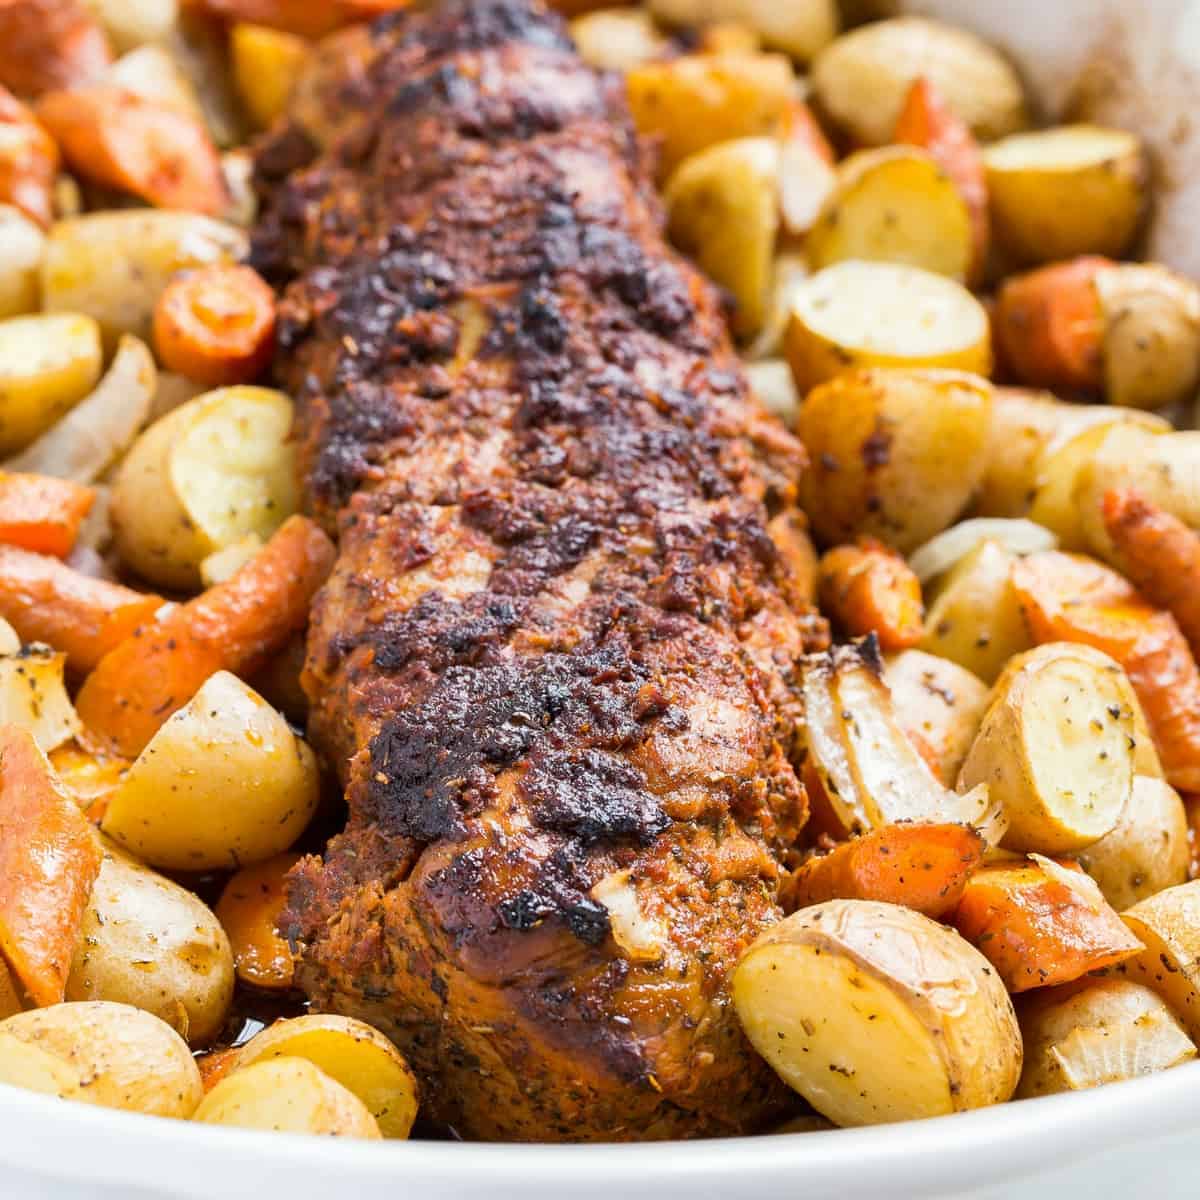 Tomato Roasted Pork Loin with Vegetables